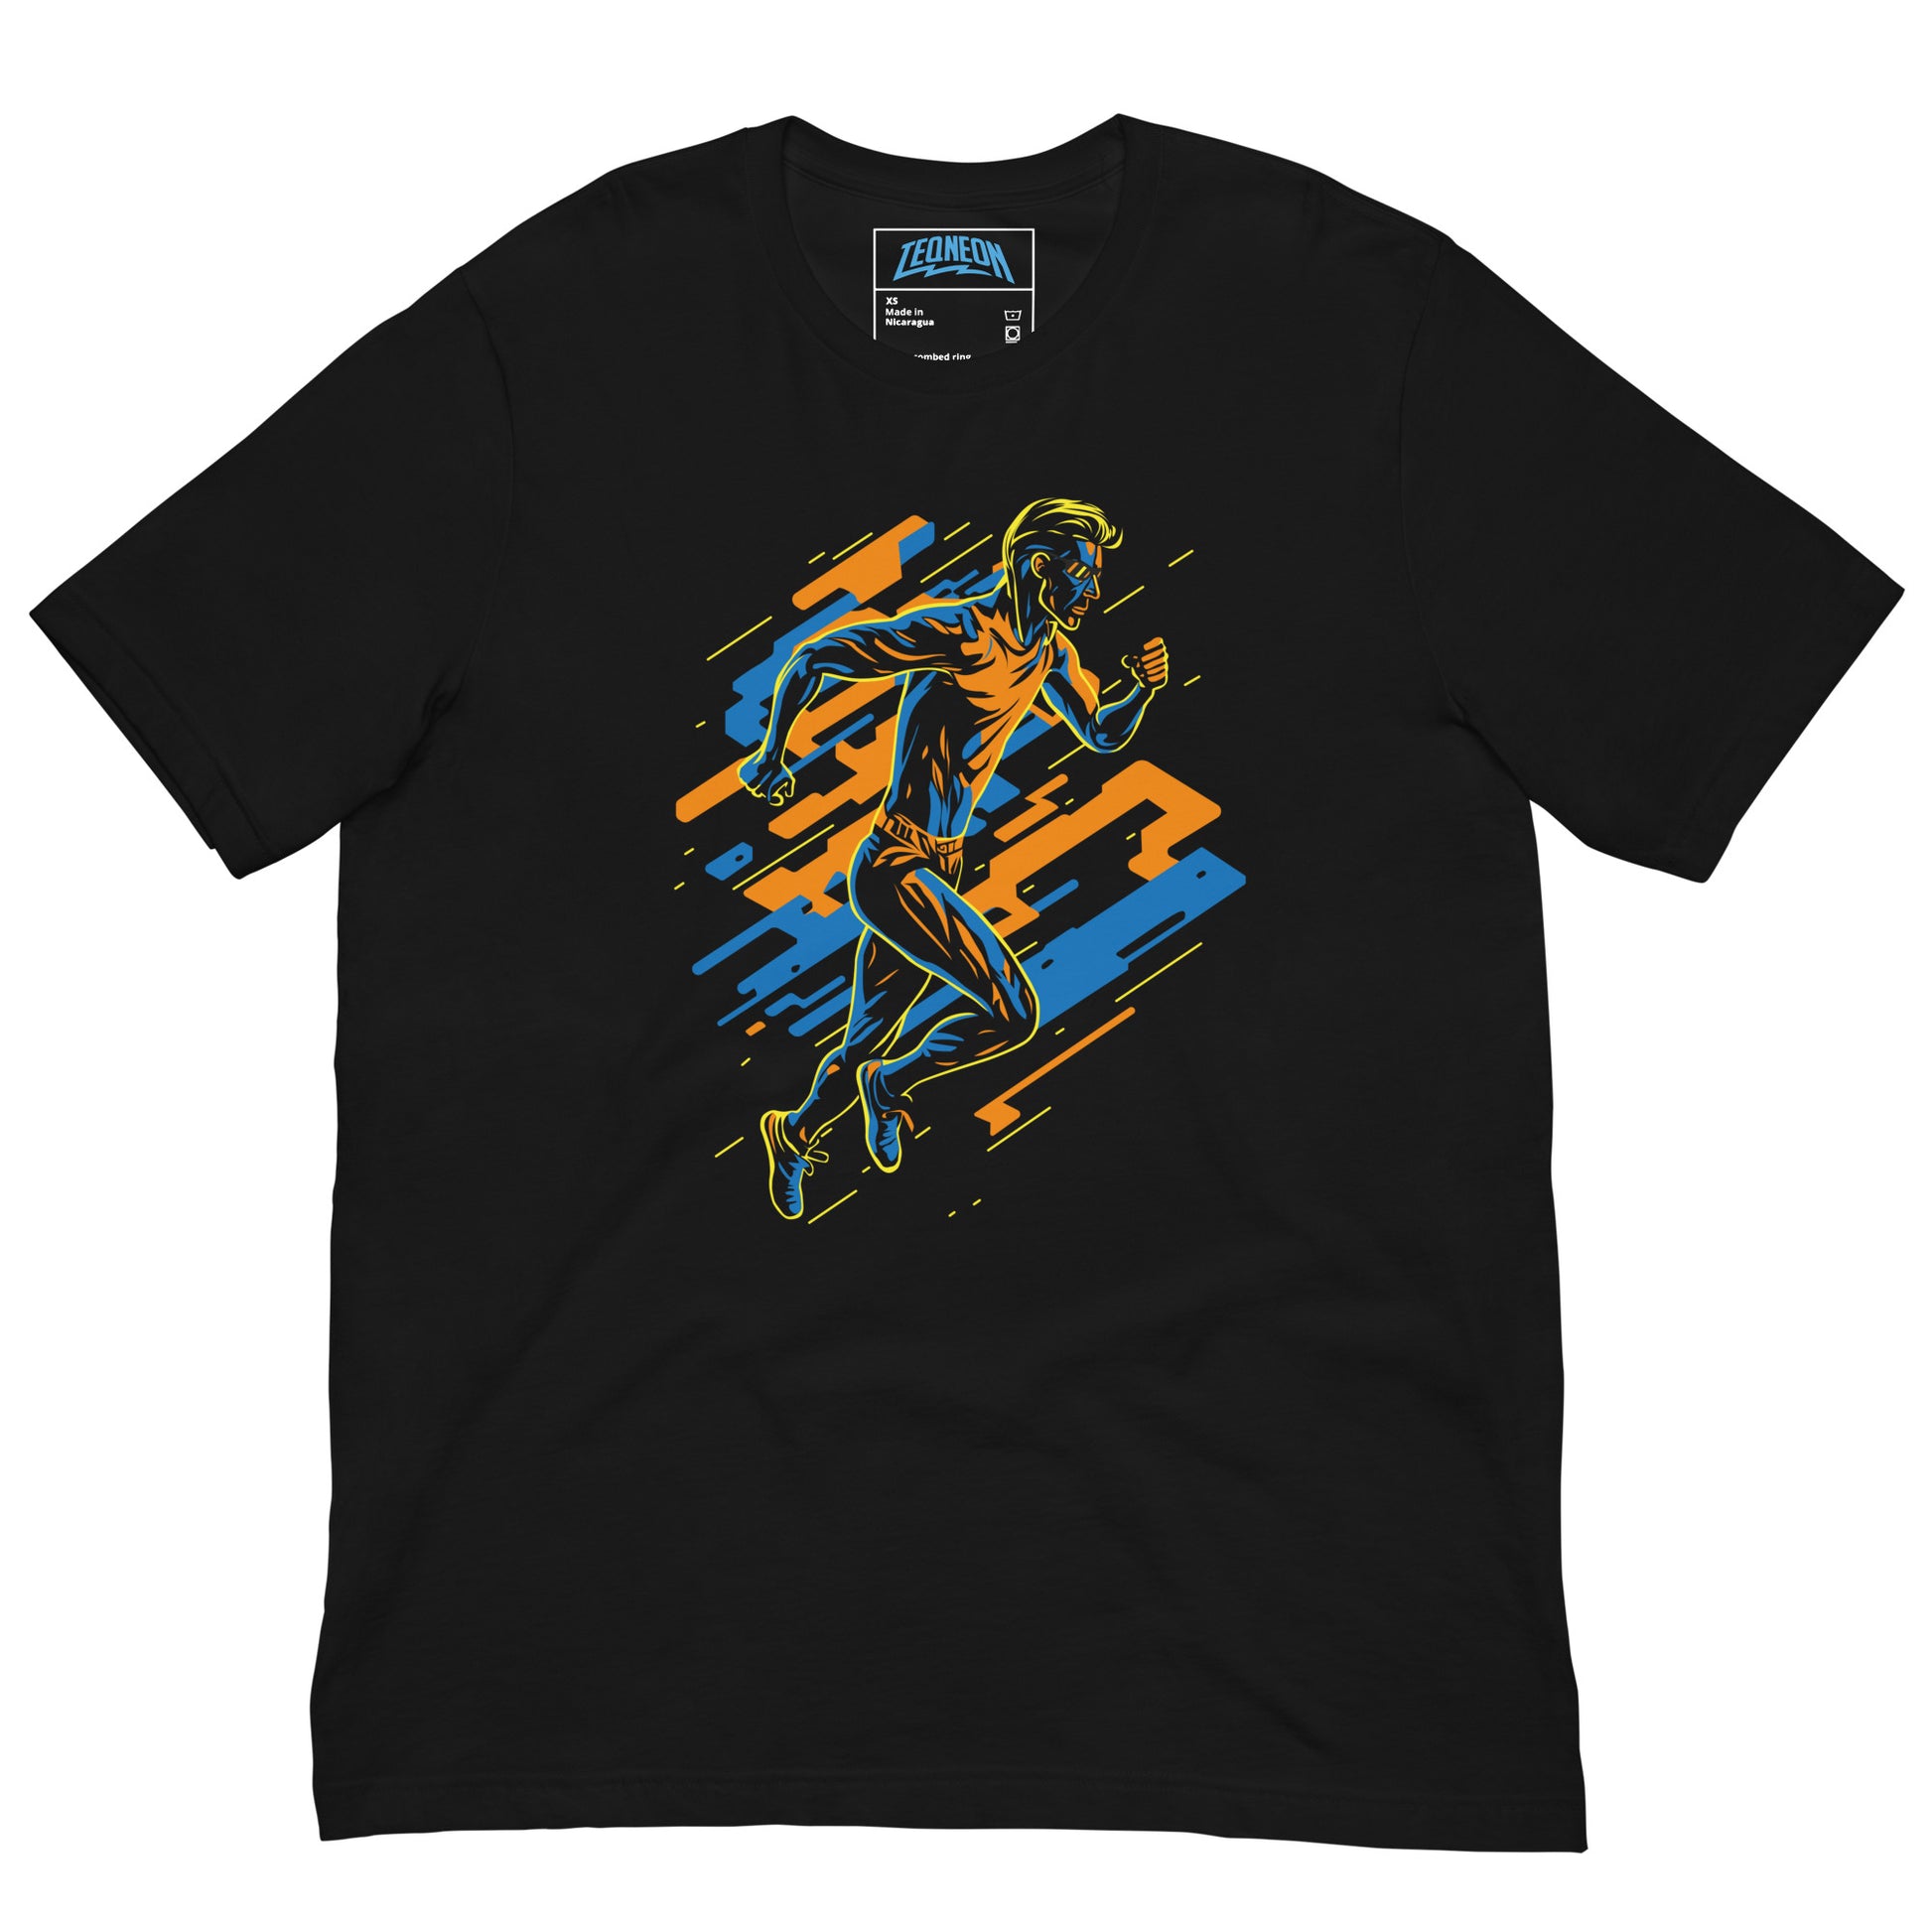 Black T-Shirt featuring a vibrant and dynamic runner design, capturing the energy of a 'Running Man'. Taken from the TEQNEON Radioactive collection